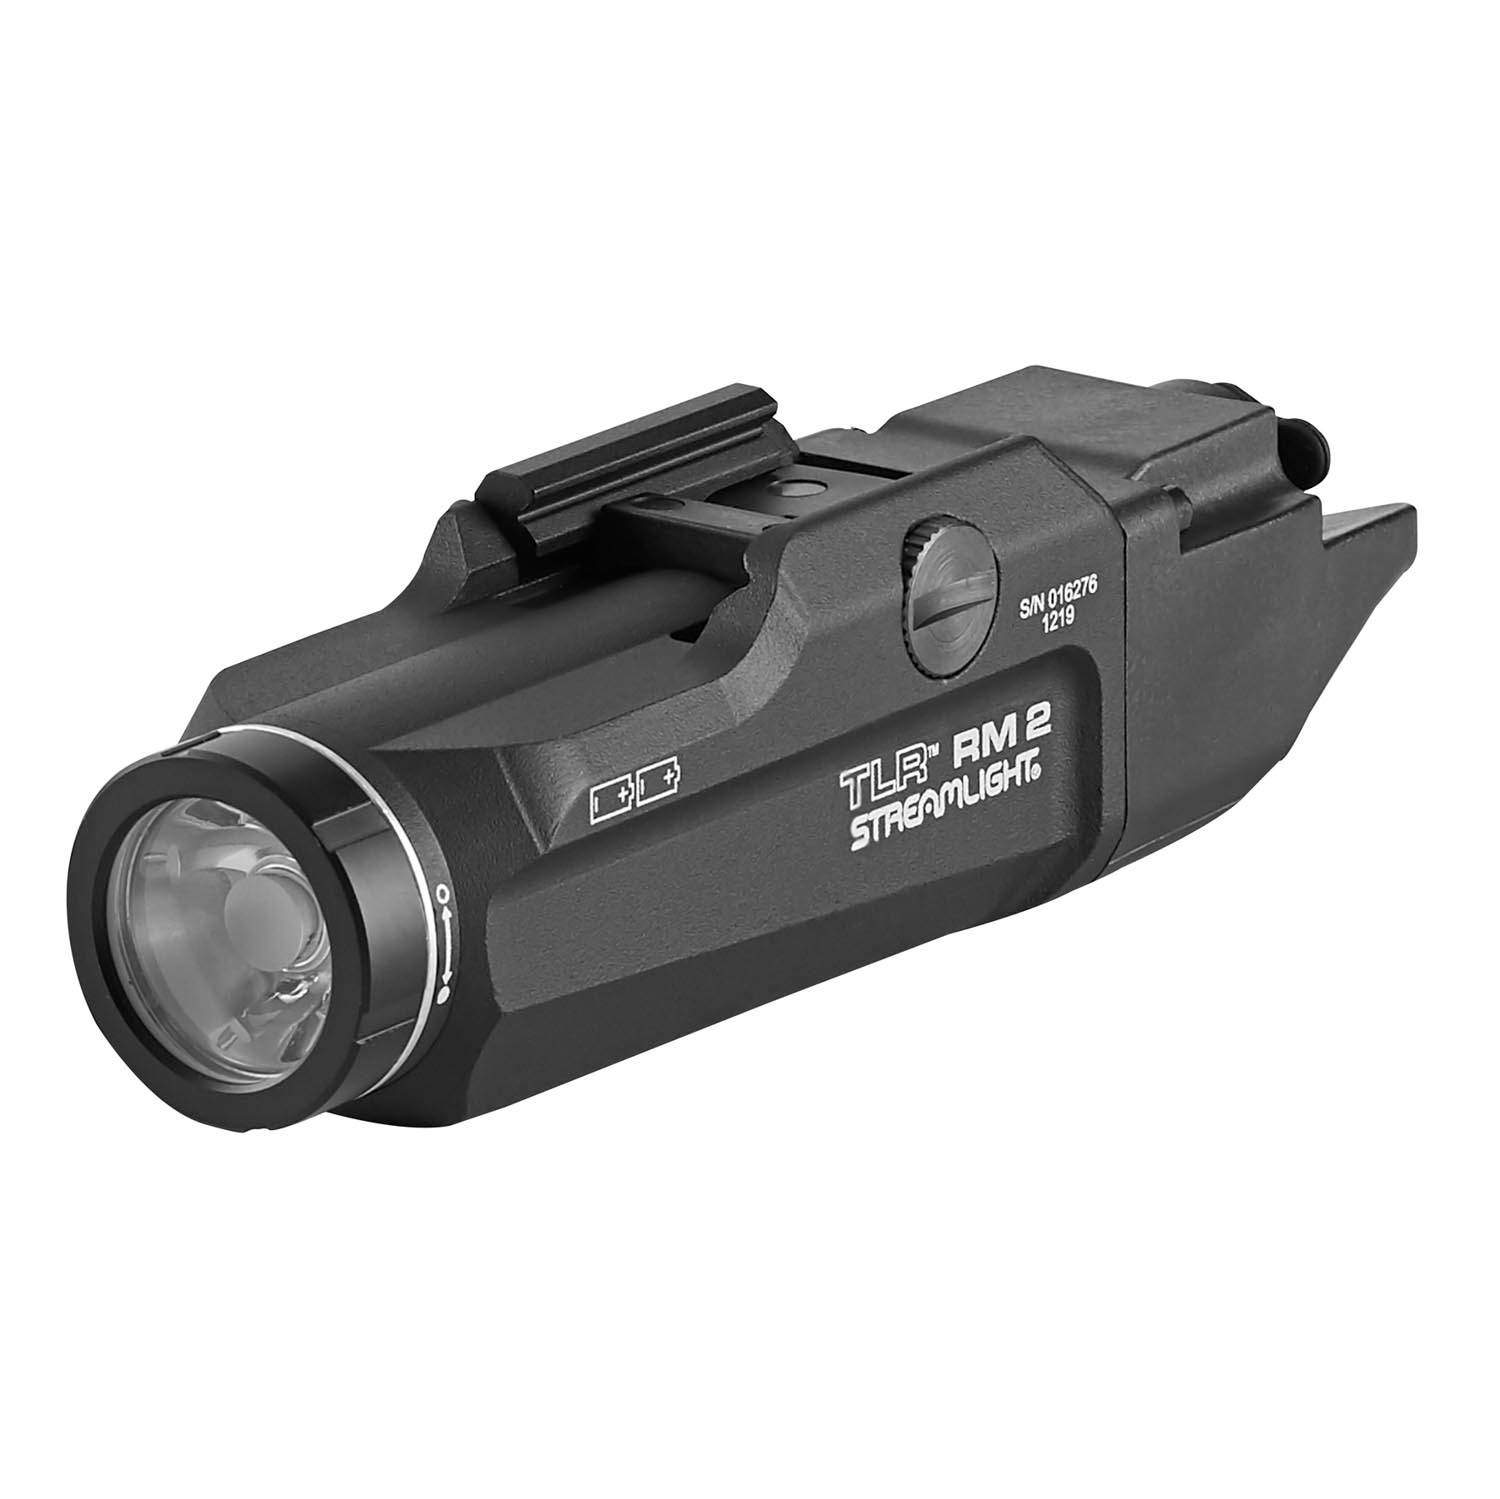 Streamlight TLR RM 2 Compact Tac Lighting System